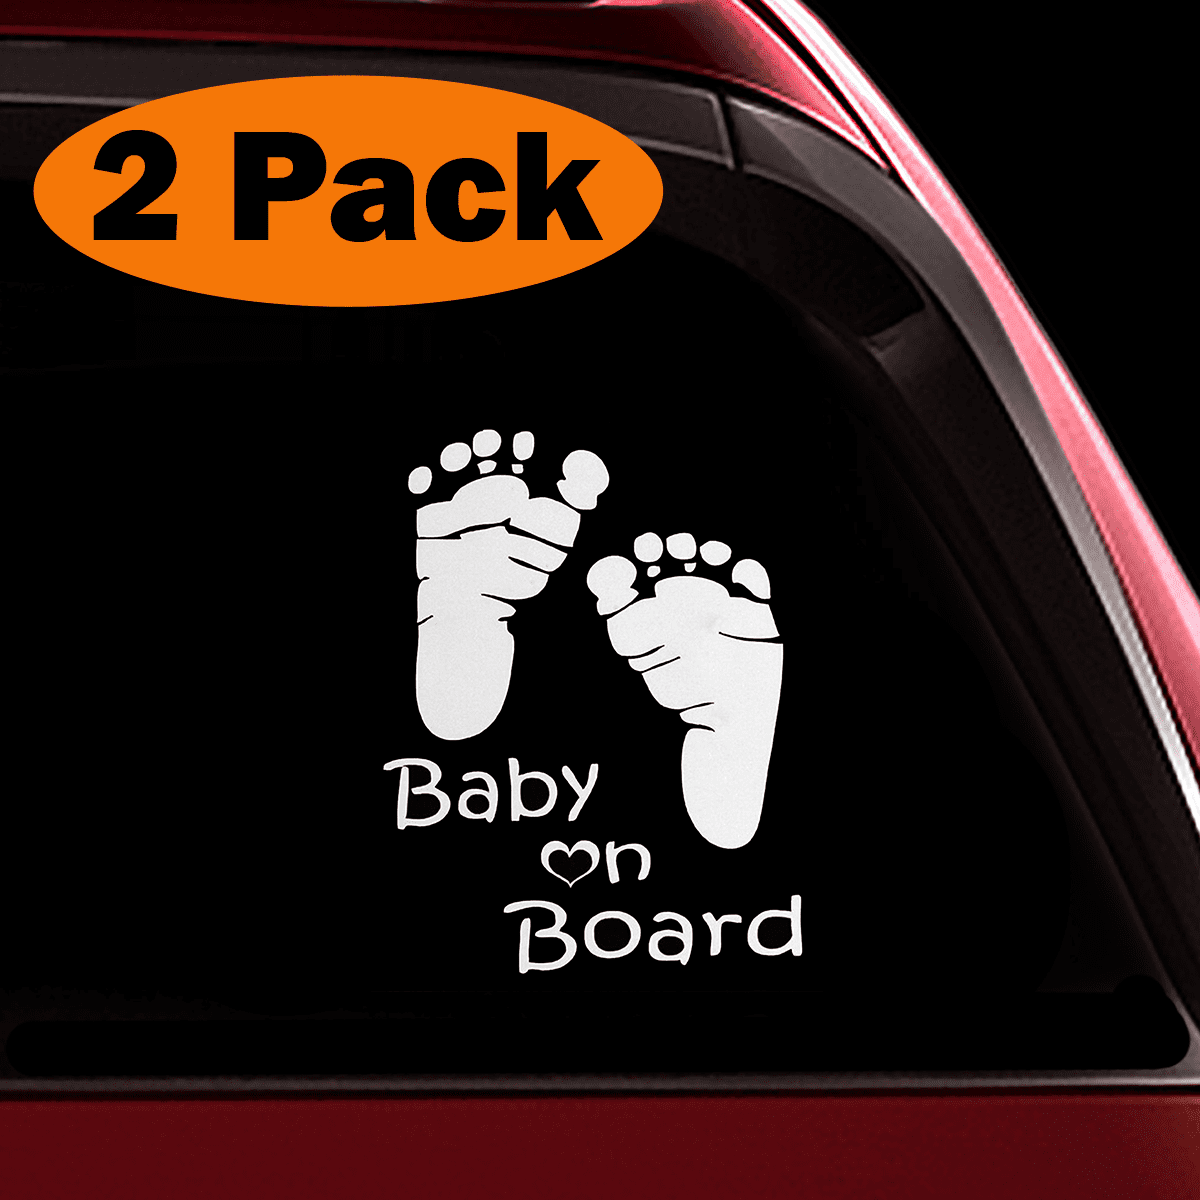 CAR CHILD YELLOW SAFETY SIGNS SUCTION CUPS Vehicle Window Sticker Baby On Board 